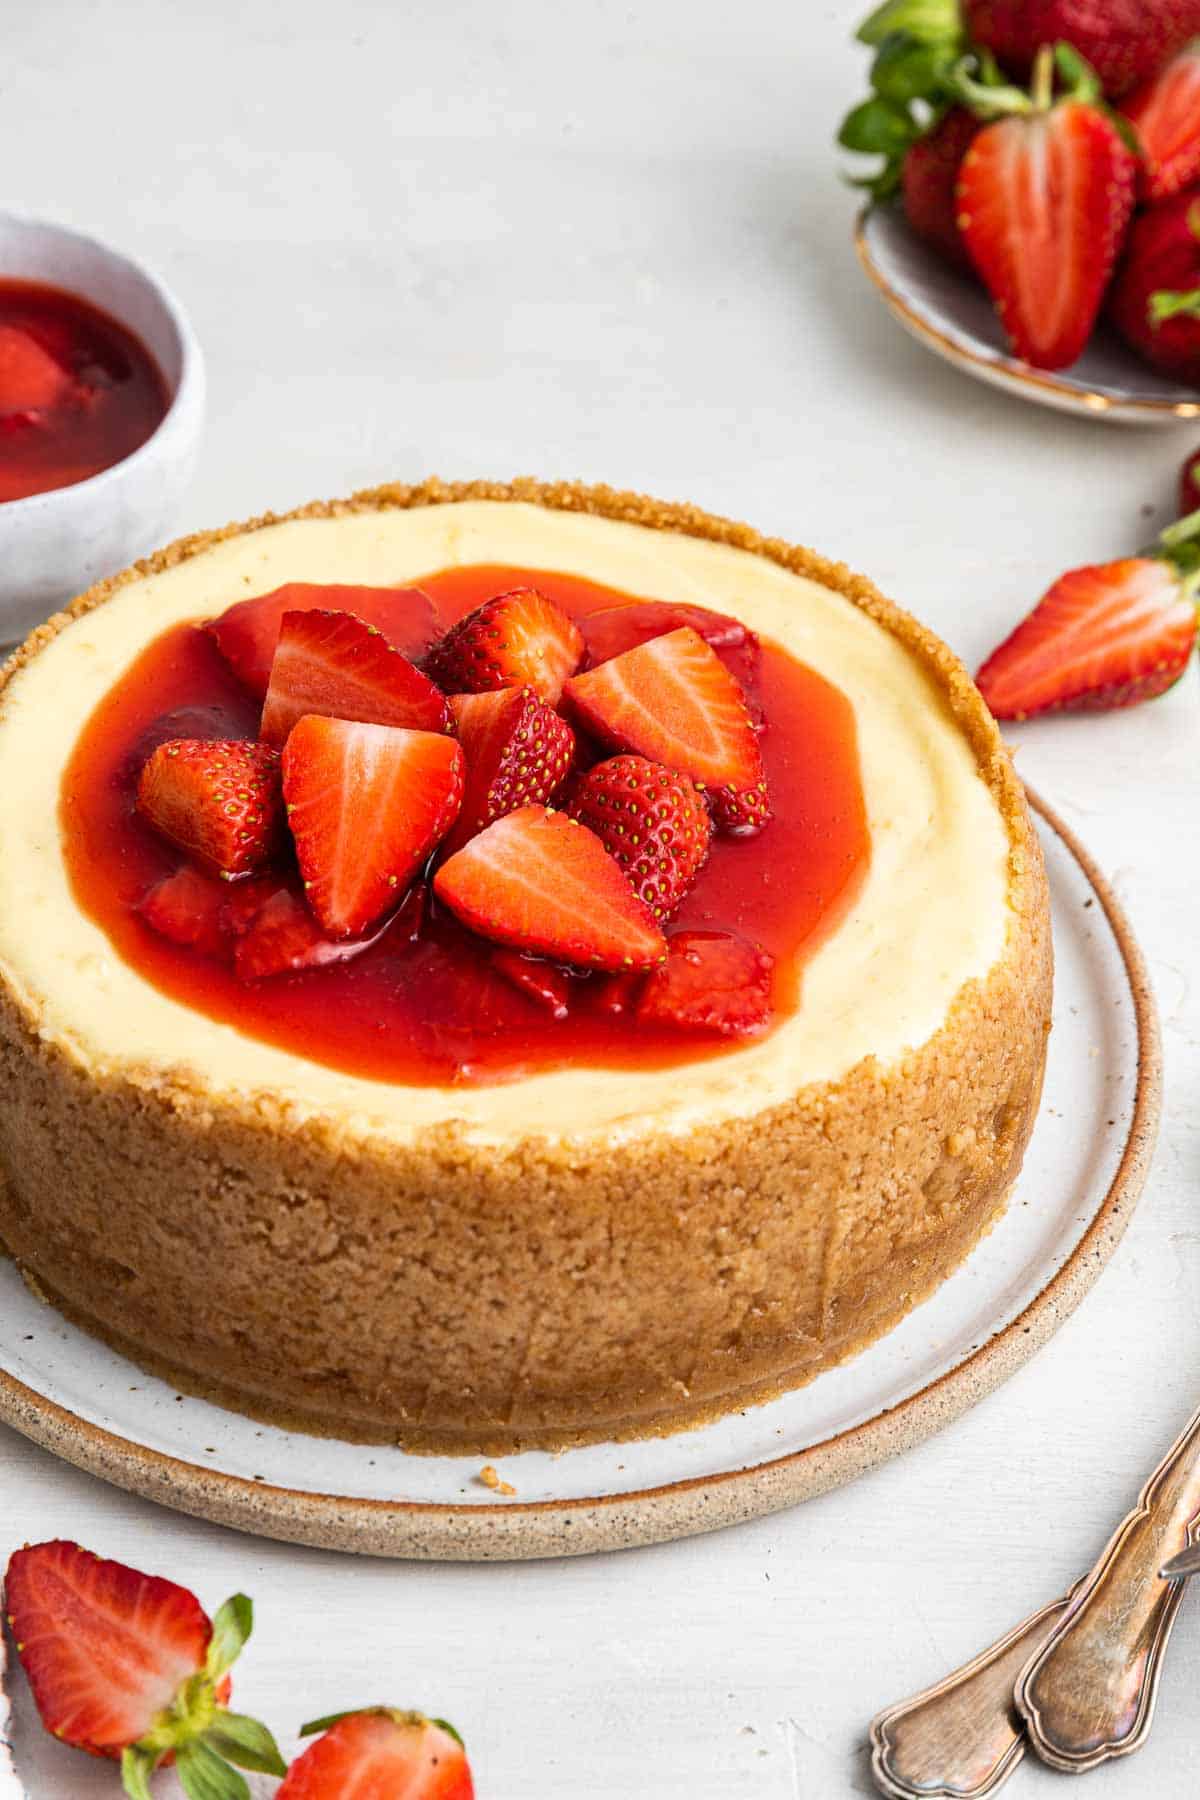 Small 6 inch cheesecake recipe with strawberry sauce on top and a tall crust.